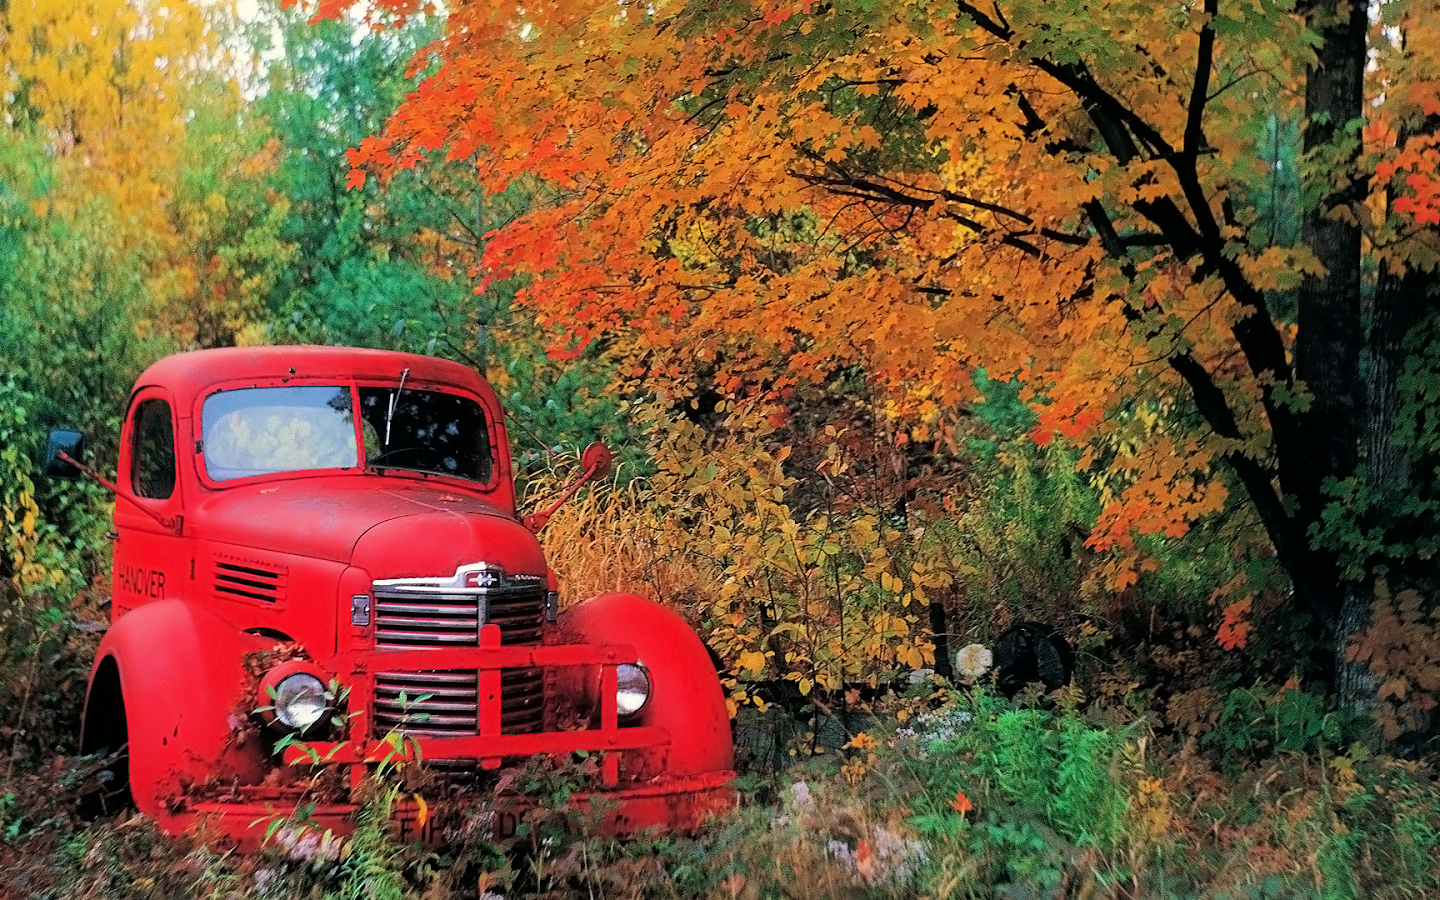 Free download Autumn Old Truck Wallpaper Congress is More Conservative and [1600x900] for your Desktop, Mobile & Tablet. Explore Old Truck Wallpaper. Old Ford Truck Wallpaper, Truck Wallpaper Desktop